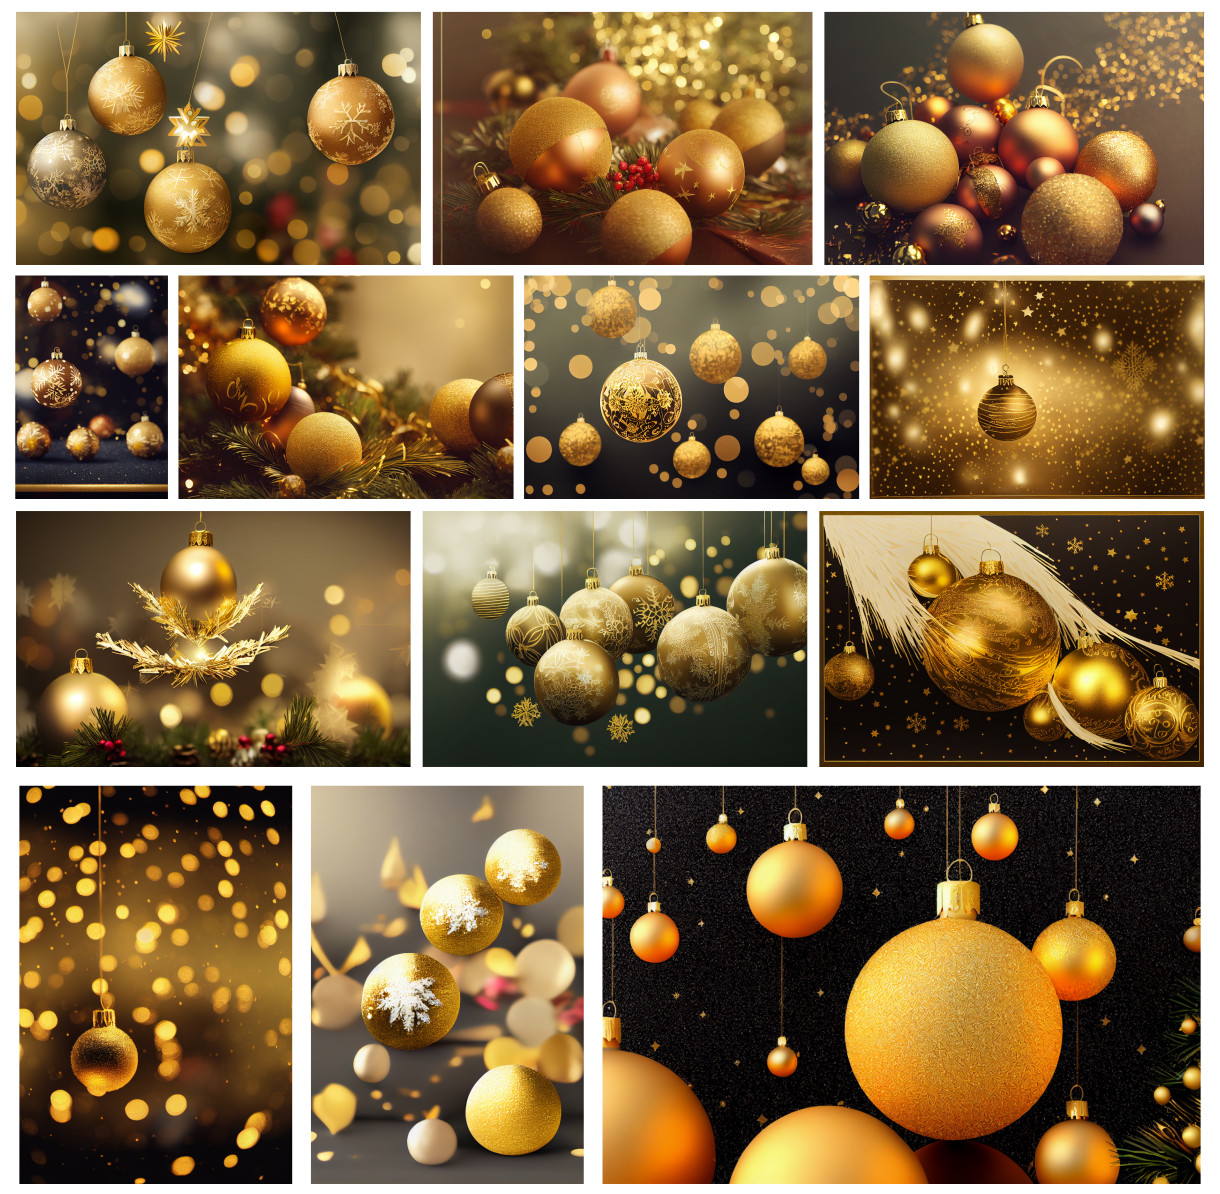 Golden Gleam: Elevate Your Christmas Greetings with Luxurious Gold Ball Ornaments